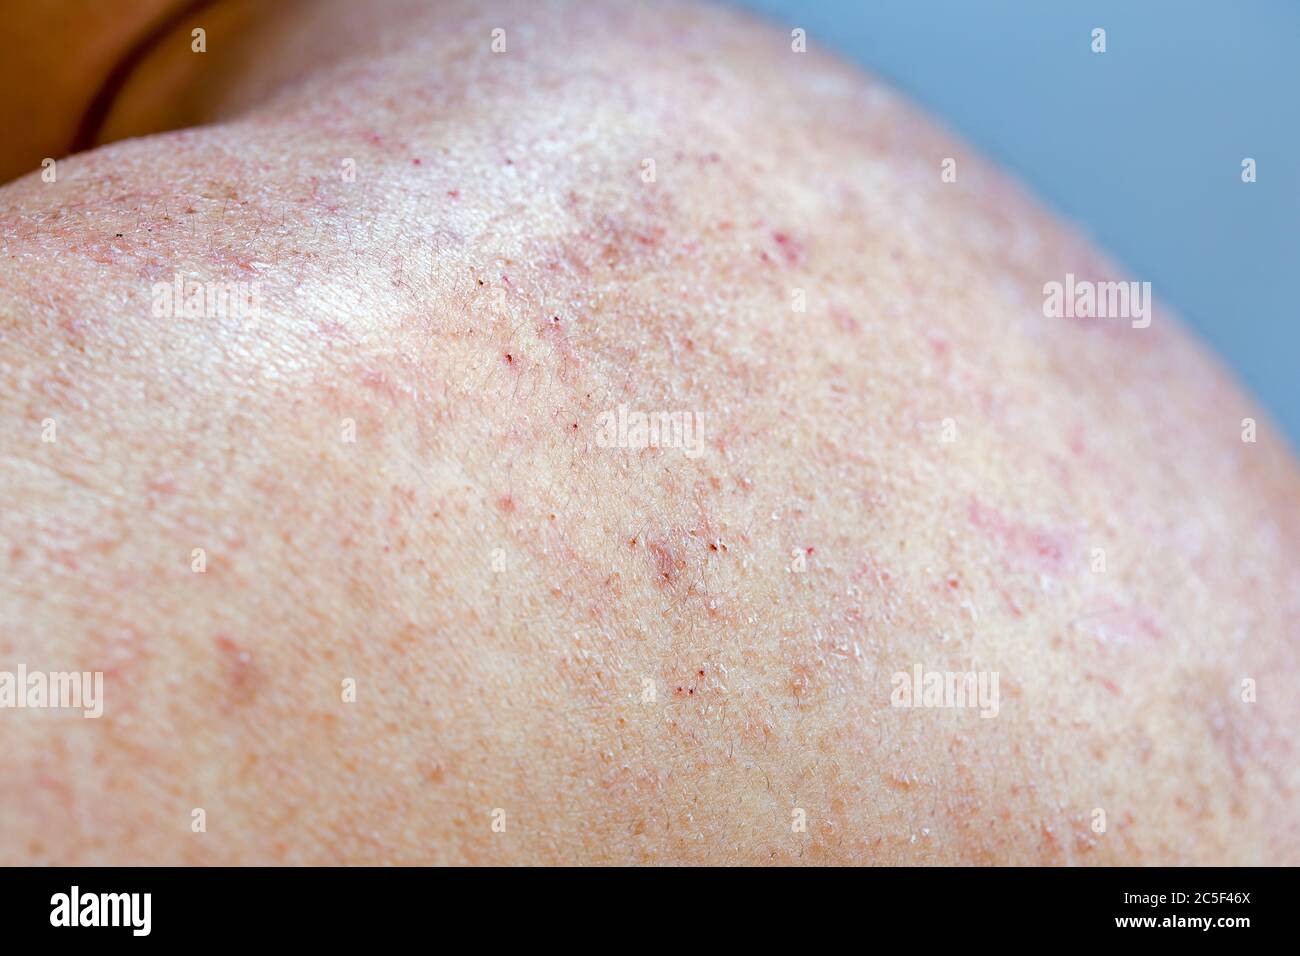 Extreme close-up photography of the atocpic dermatitis symptoms on the left shoulder of an adult male. Stock Photo